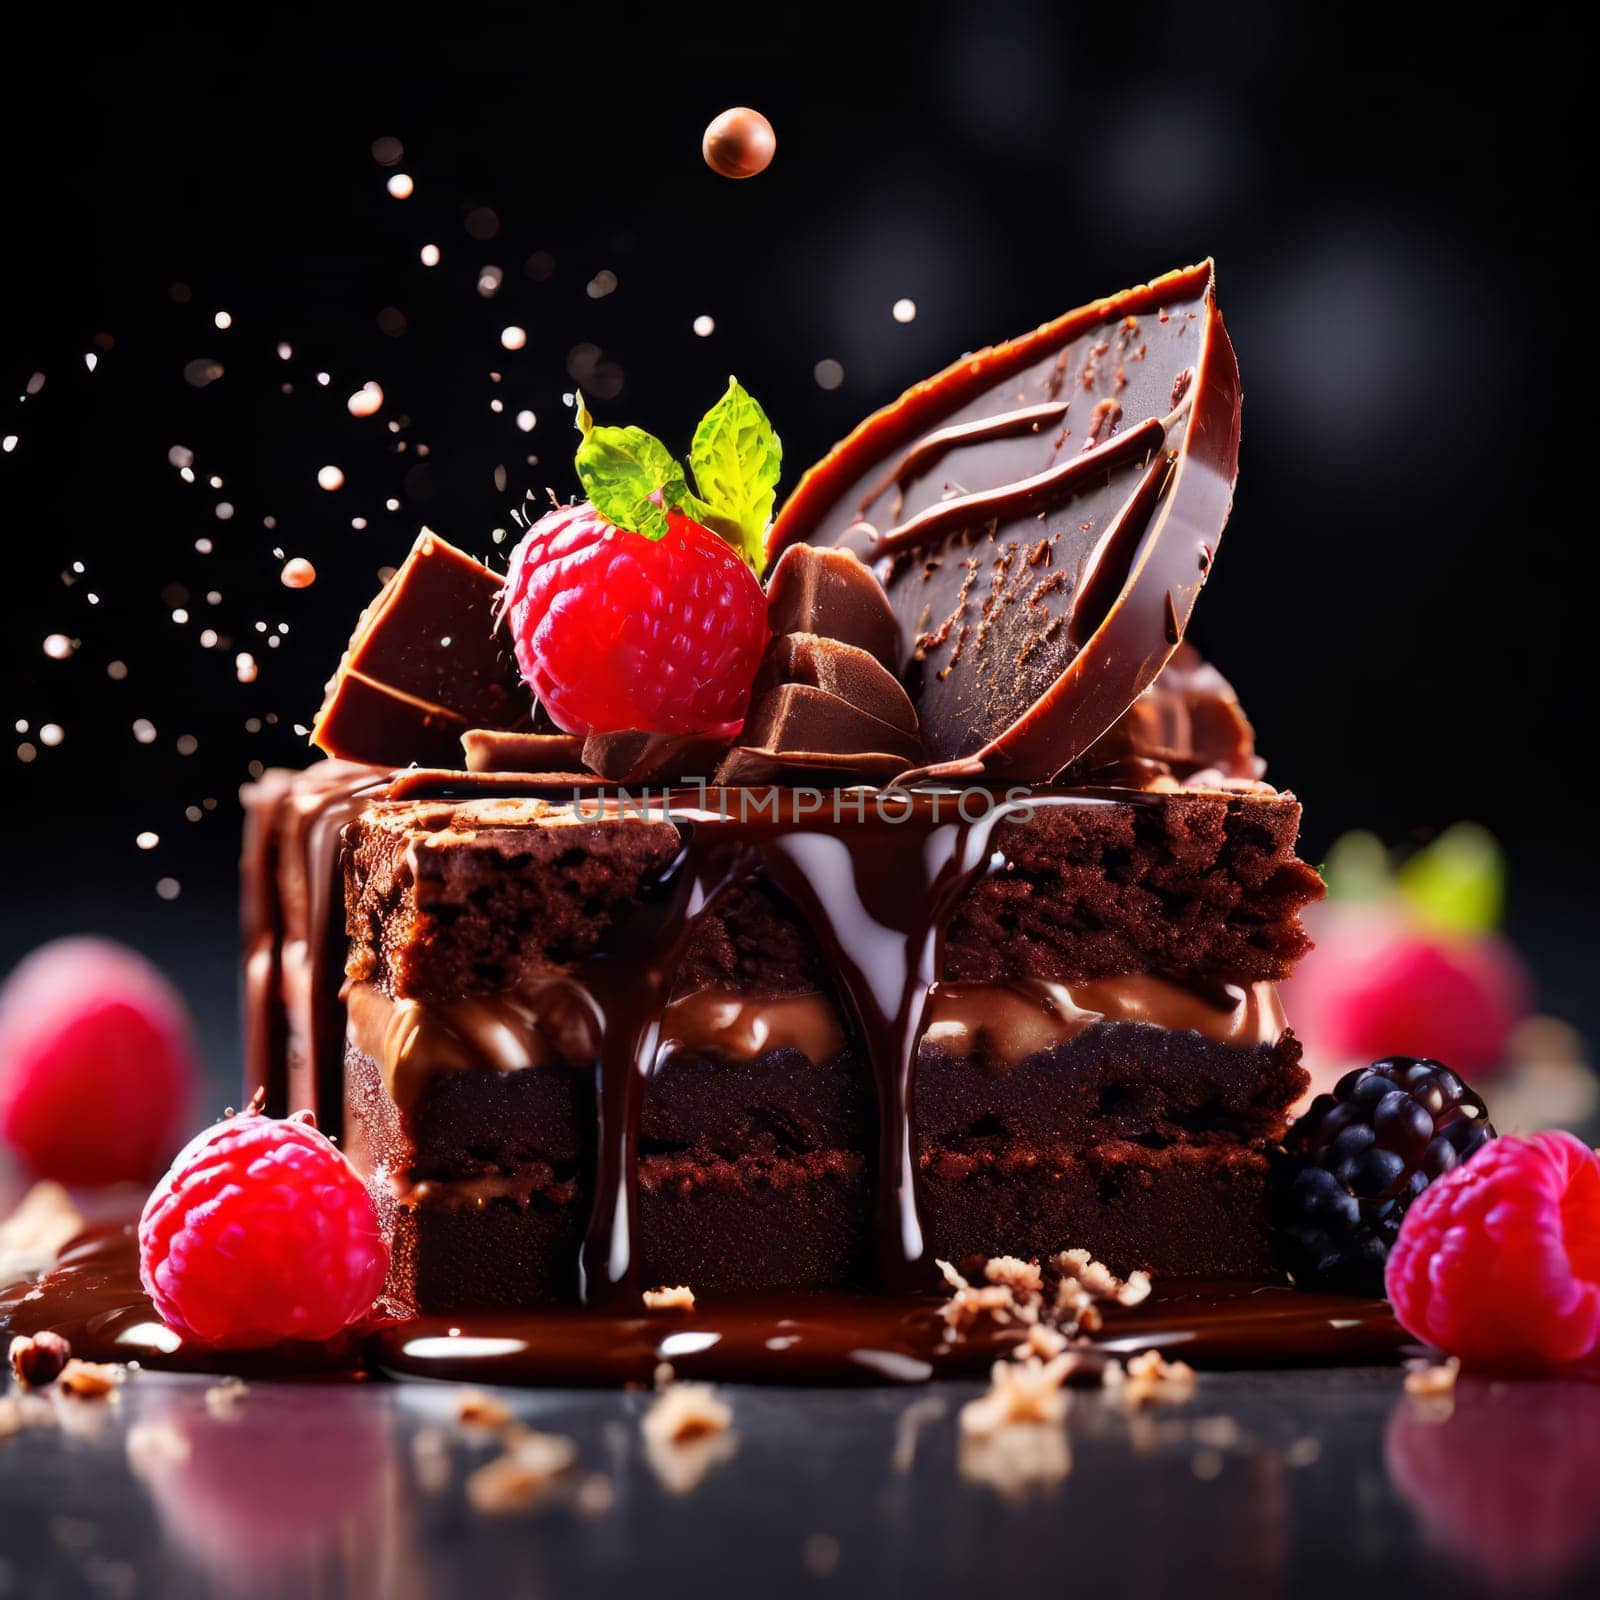 Decadent chocolate cake adorned with fresh berries, drizzled with rich chocolate sauce. For advertising bakery products, cafe, restaurant menus, culinary books, food blogs, website of pastry shop